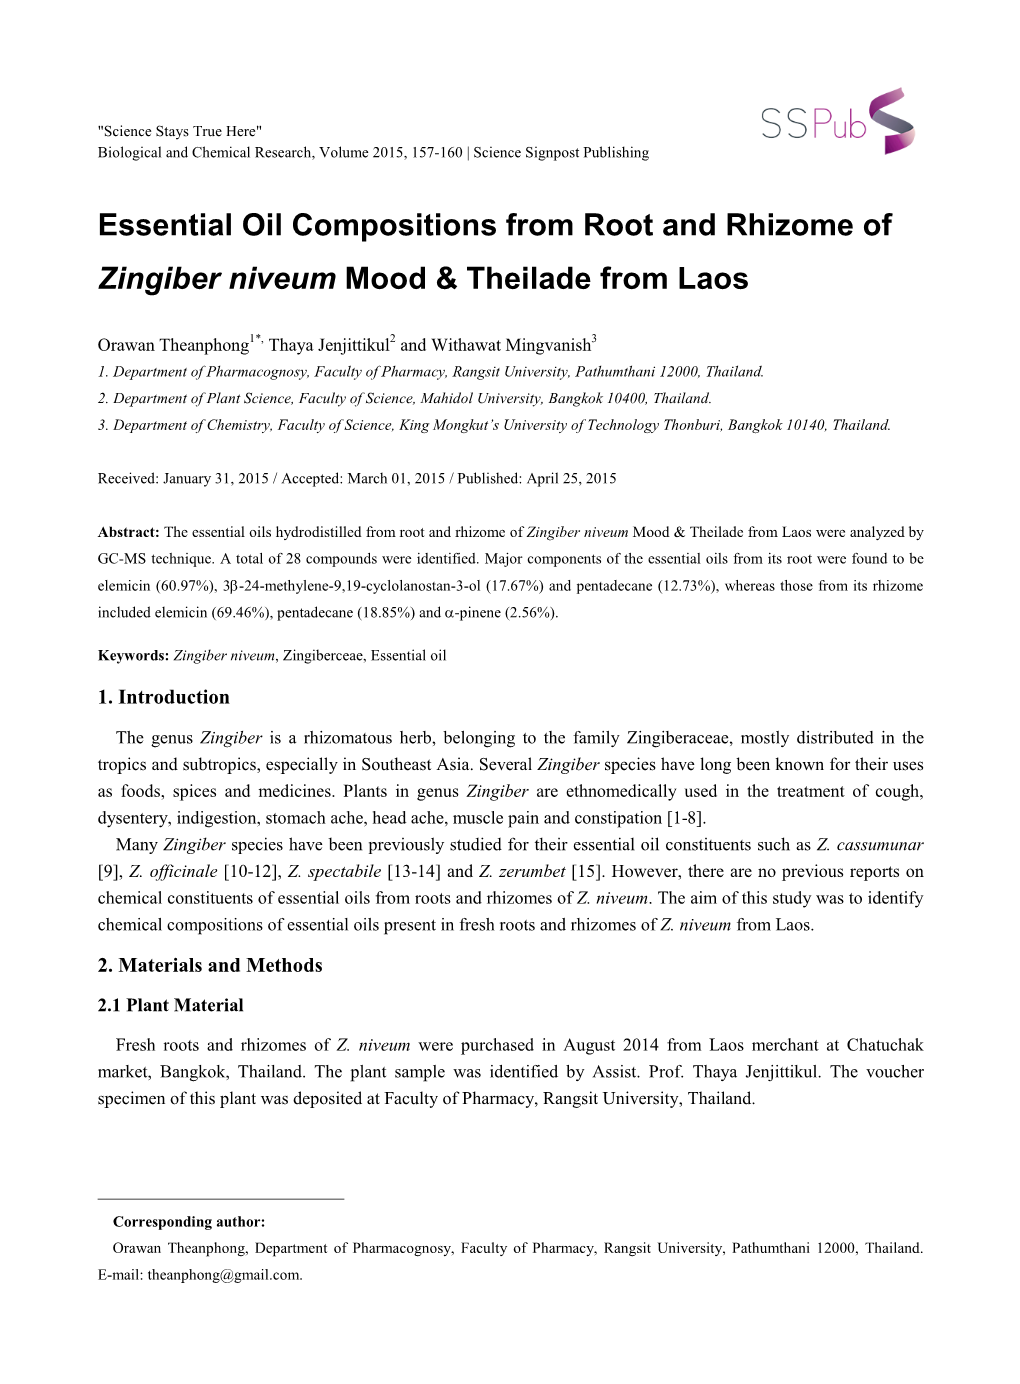 Essential Oil Compositions from Root and Rhizome of Zingiber Niveum Mood & Theilade from Laos